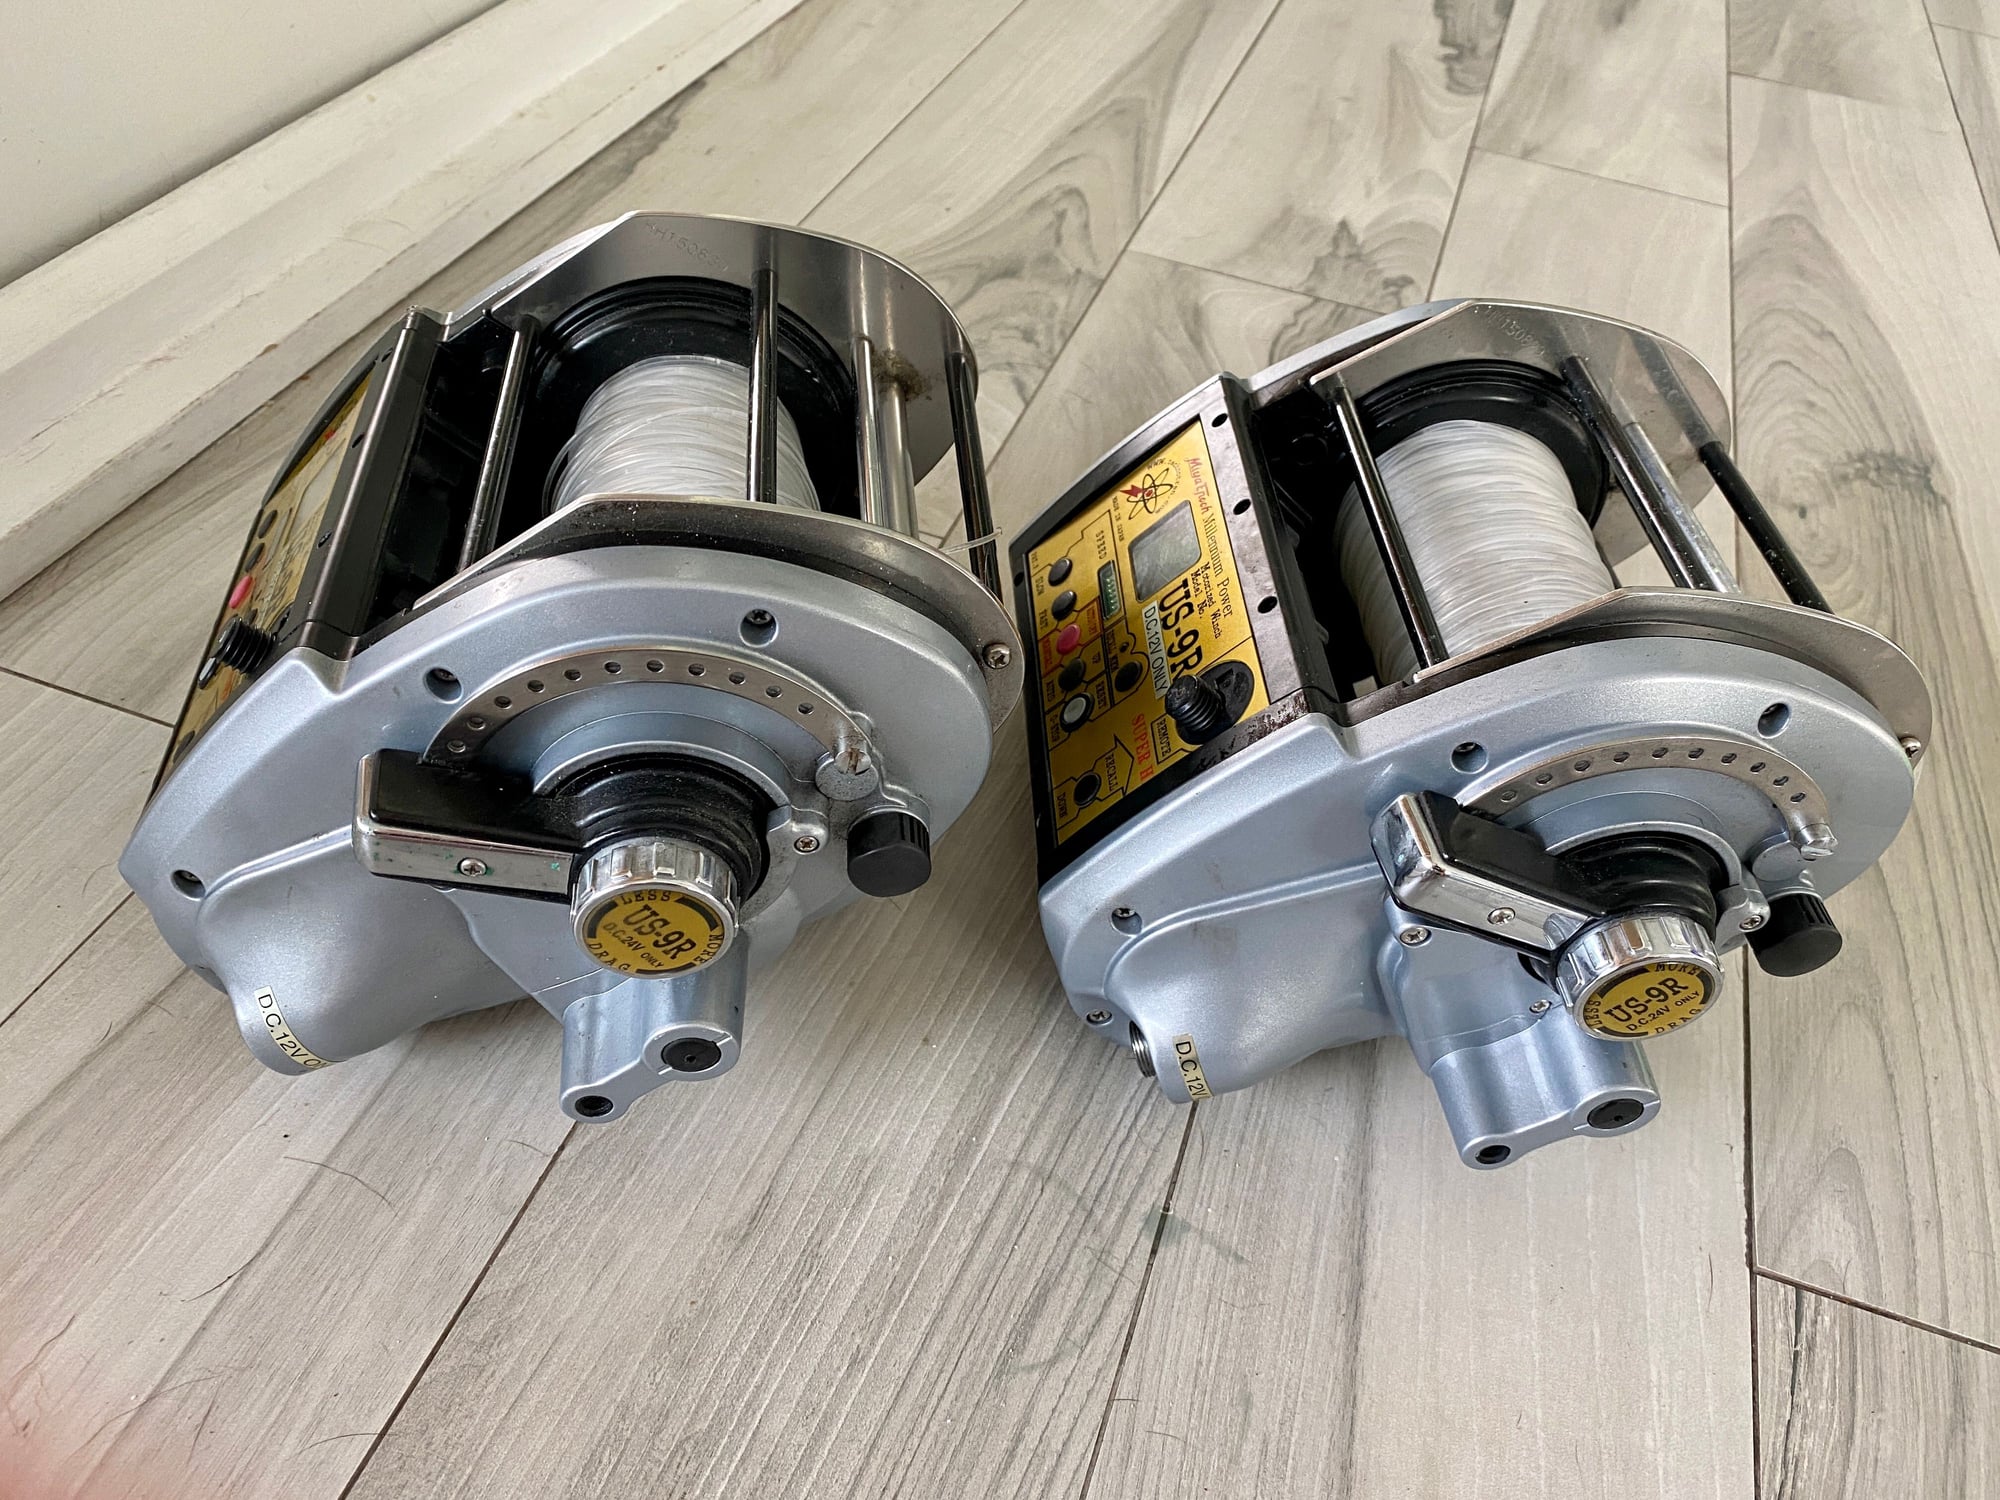 Miya Epoch electric teaser reel - The Hull Truth - Boating and